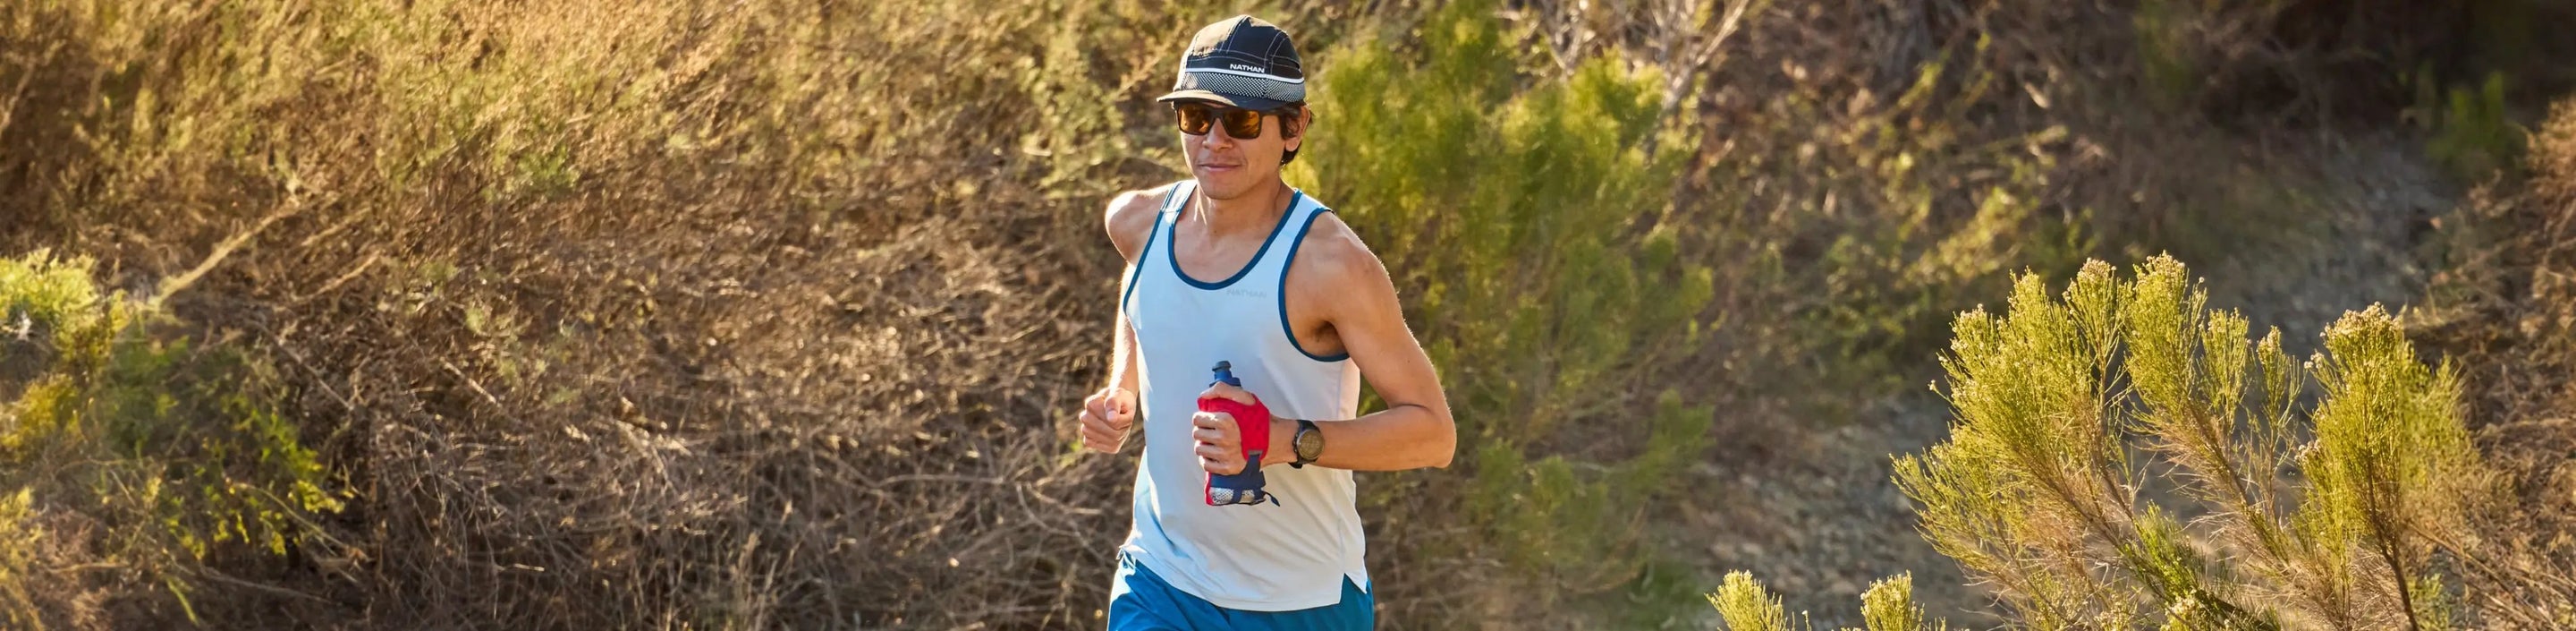 man running in Nathan Sports white tank top and holding handheld bottle